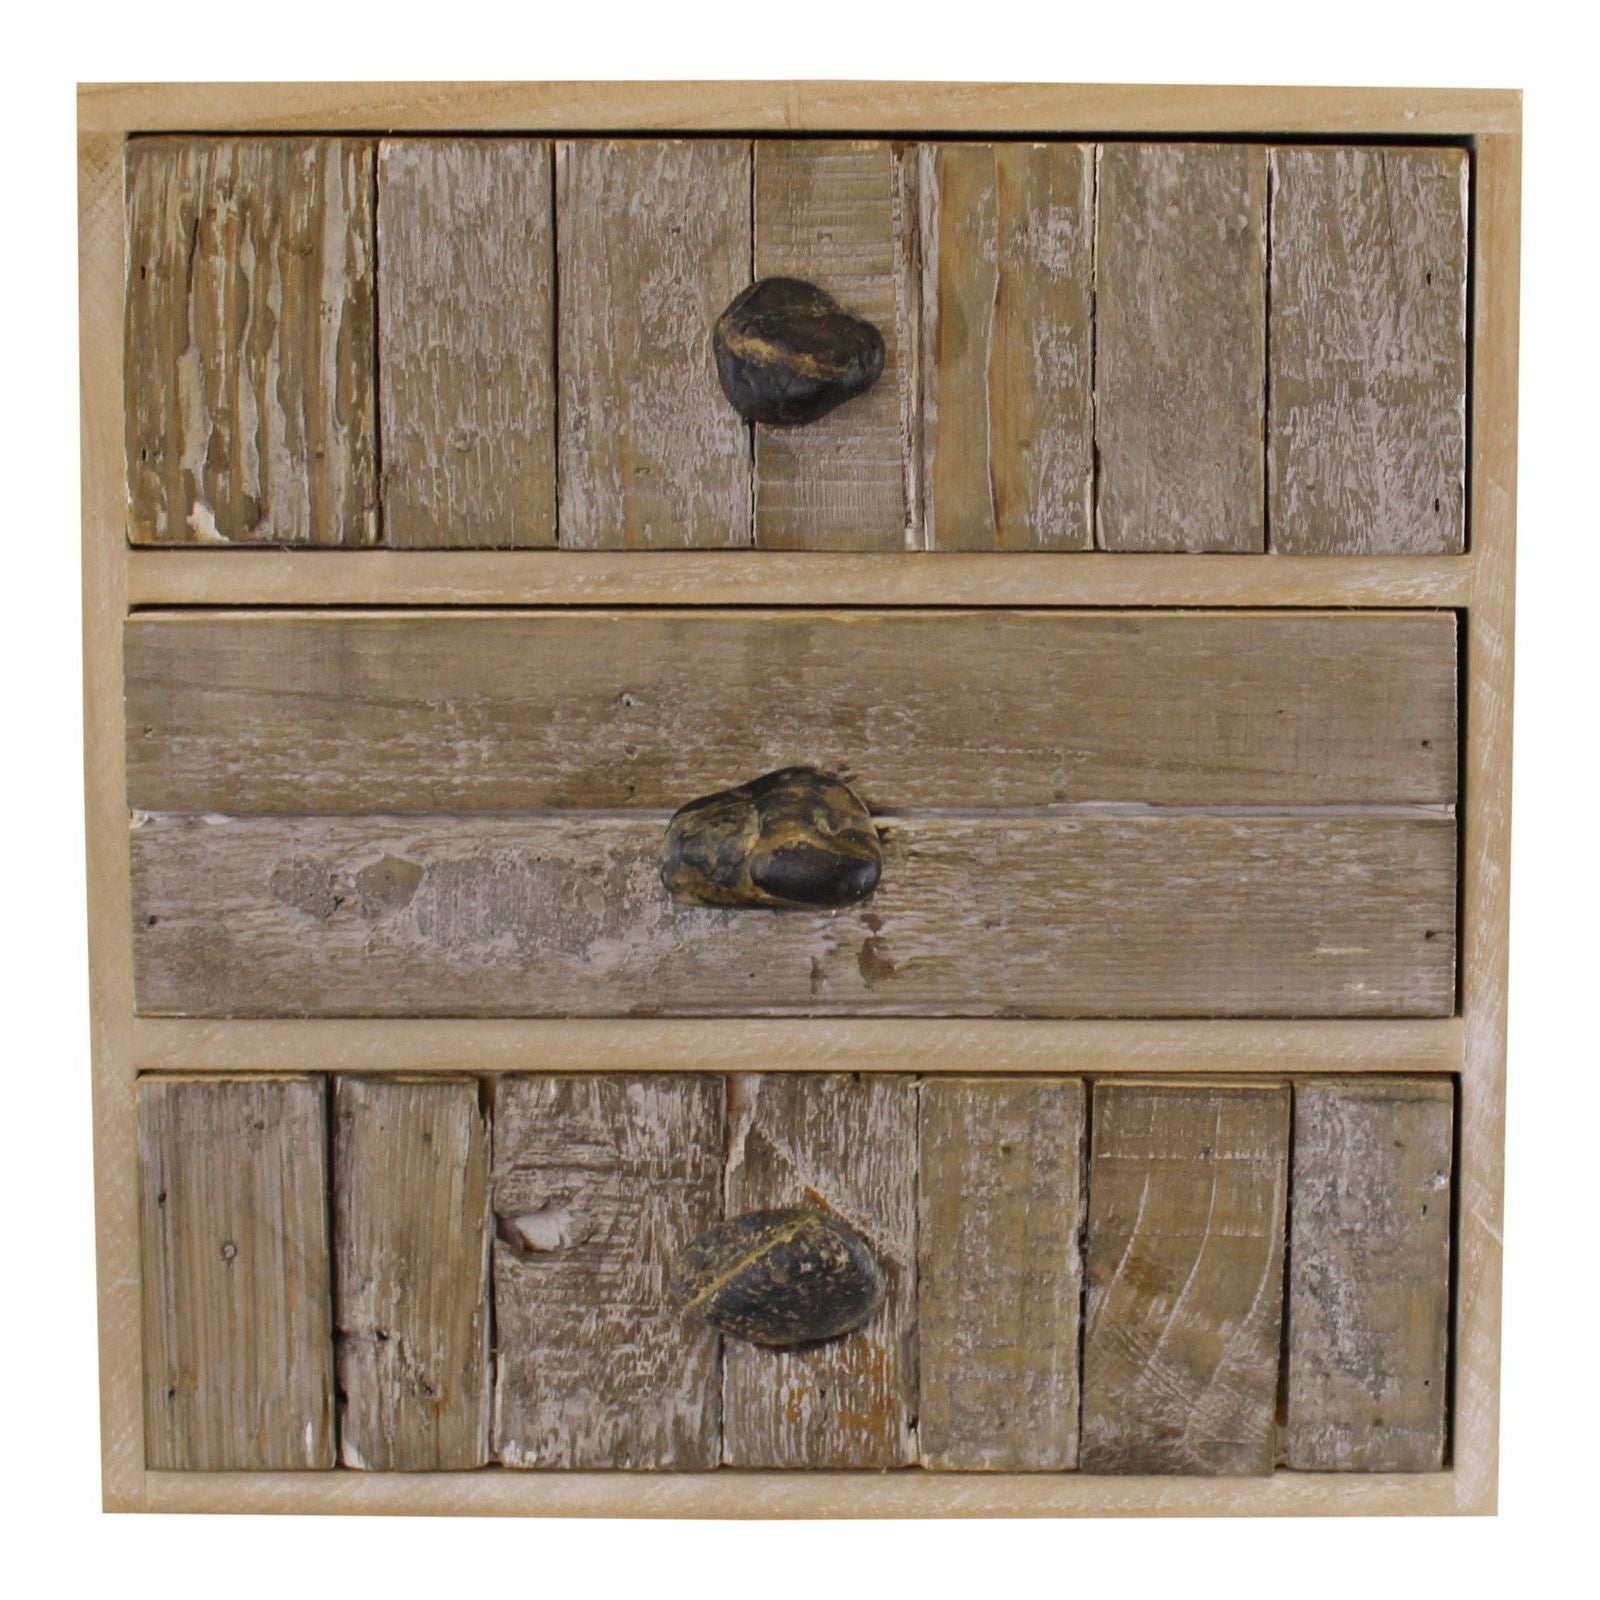 3 Drawer Unit, Driftwood Effect Drawers With Pebble Handles - Ashton and Finch